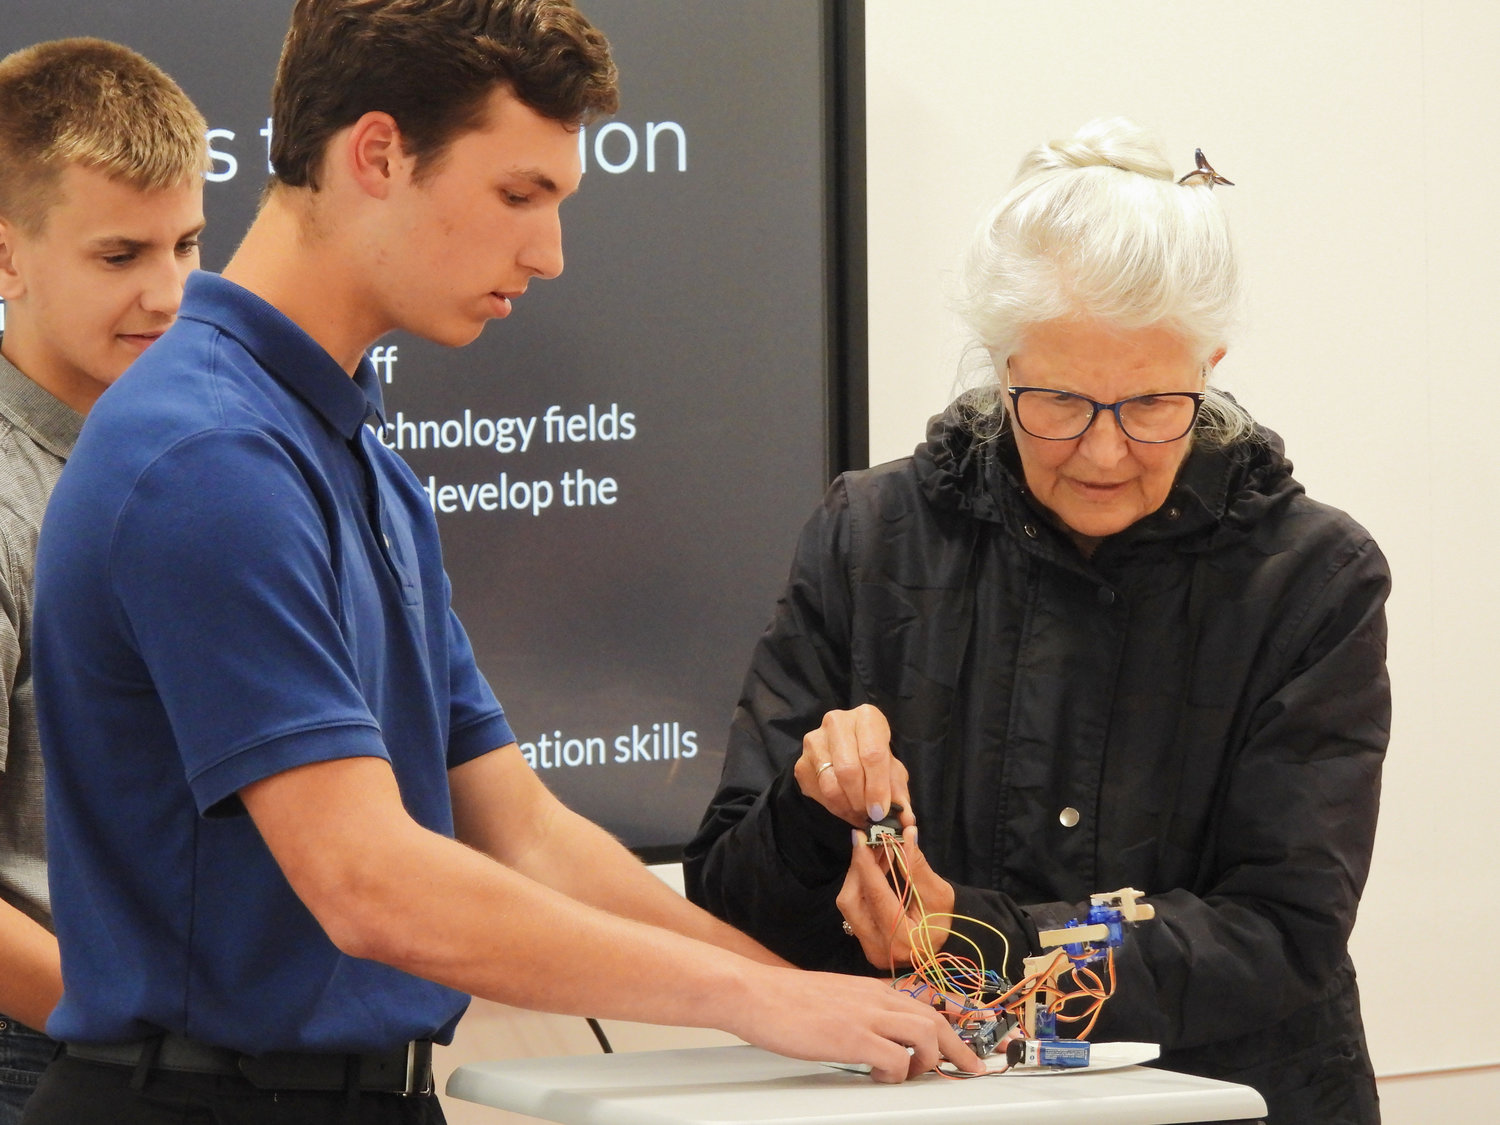 Eighth graders Andrew Kaido and Joseph Stehlik spoke before the VVS Board of Education at their regular meeting on Tuesday, looking to get the Board’s approval for a Python and Robotics elective course for high schoolers. Board Member Ann Pangburn takes a robotic arm for a spin